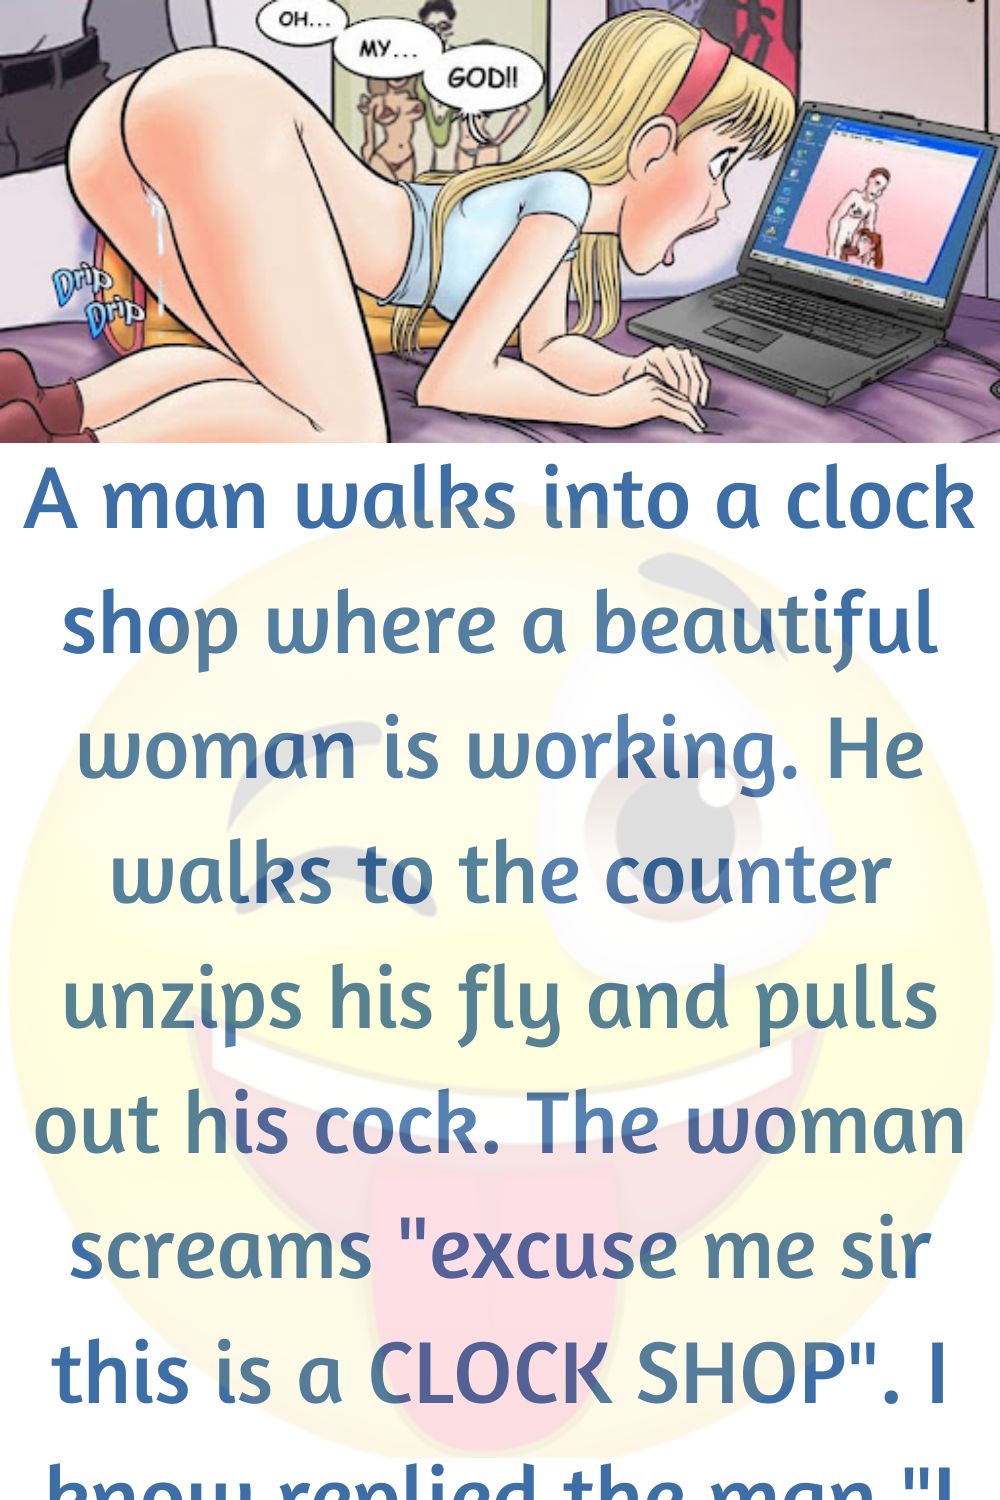 A beautiful woman is working